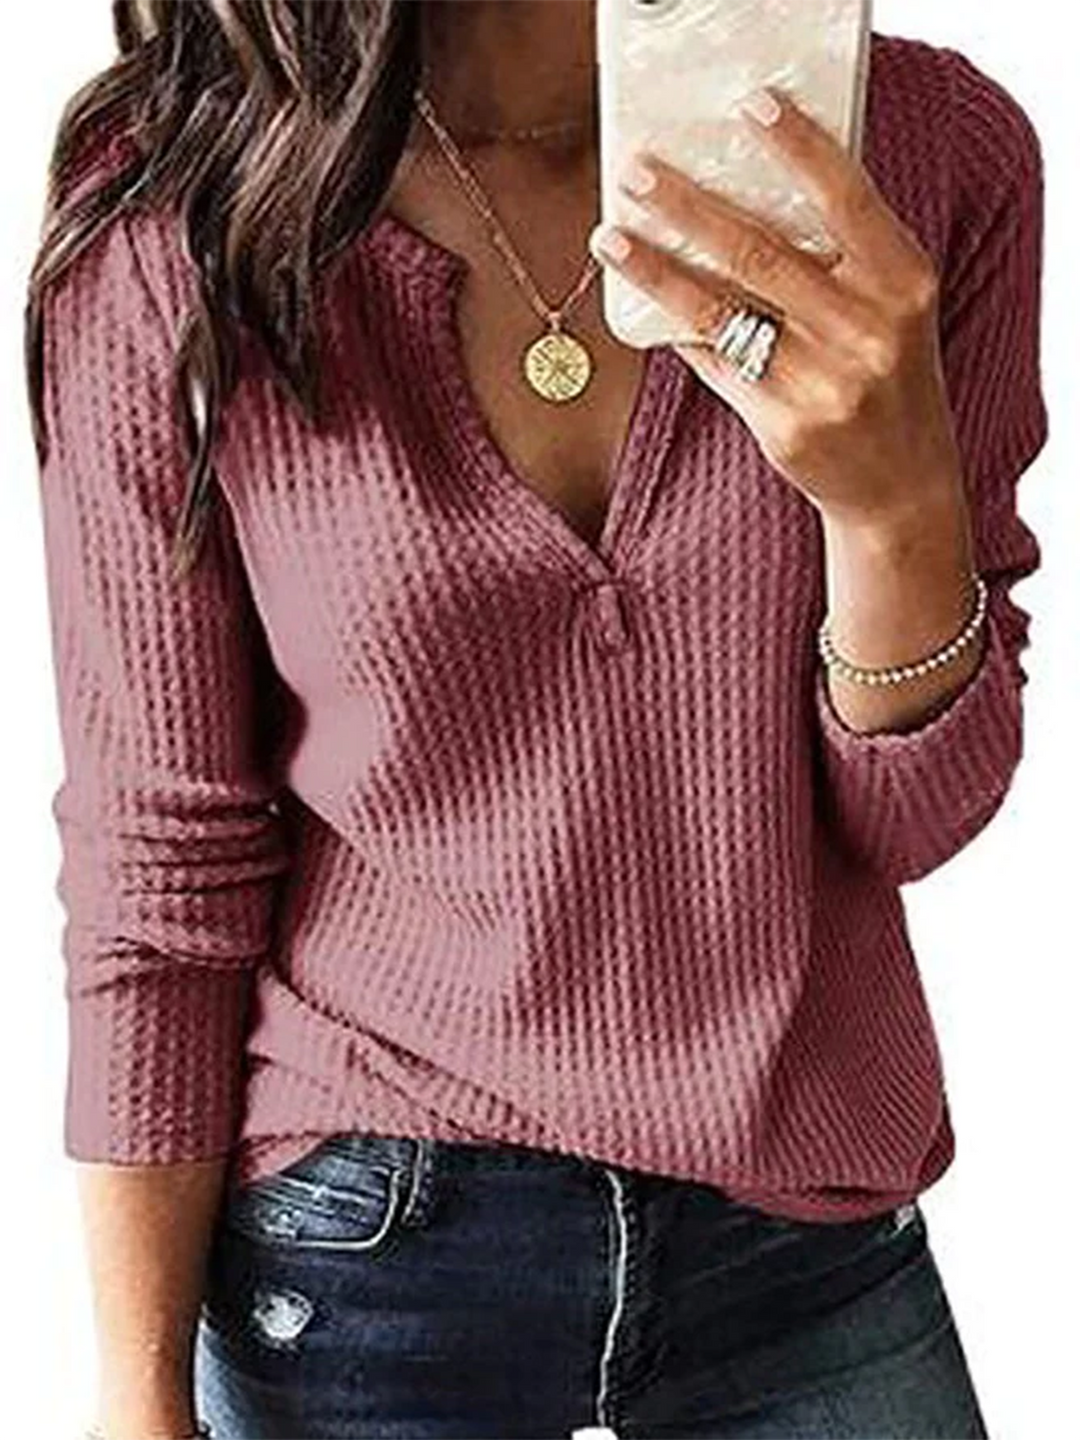 Women's Long Sleeve V Neck Plain Pullover Knitted Sweaters Waffle Knit Loose Plain Pullover Jumpers